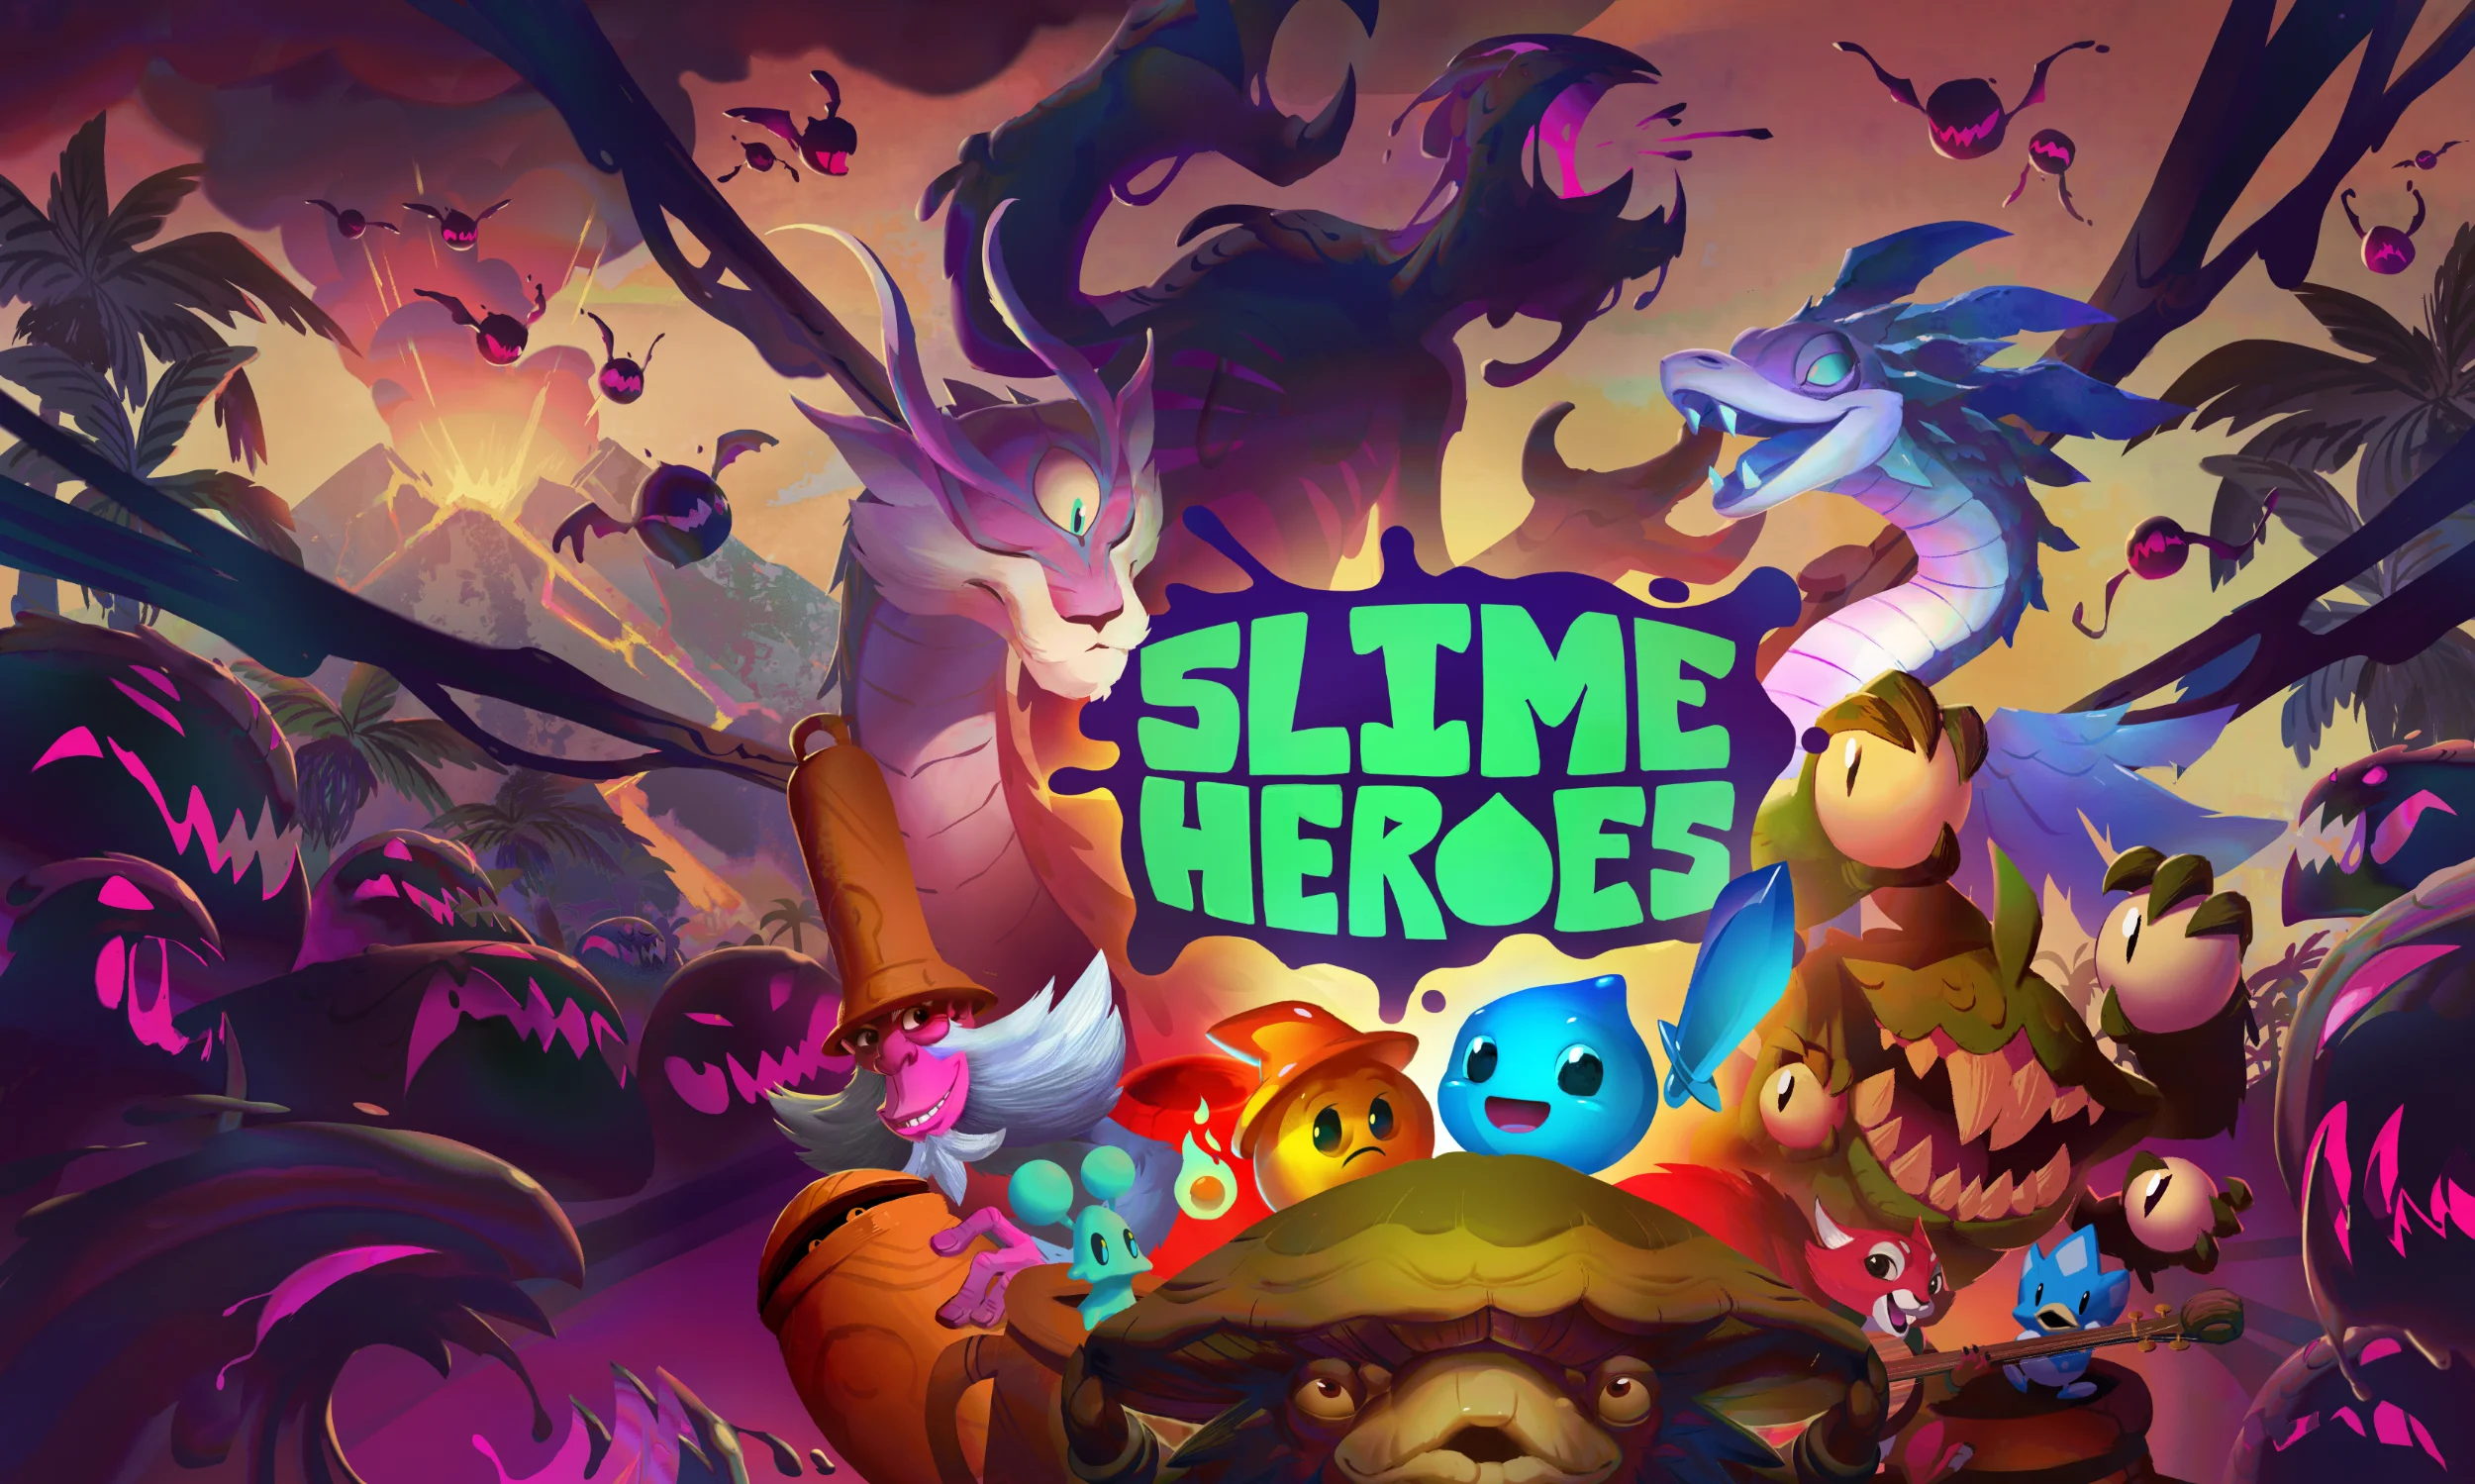 Slime Heroes art of two slime buddies surrounded by helpful spirits and corrupted slimy beasts